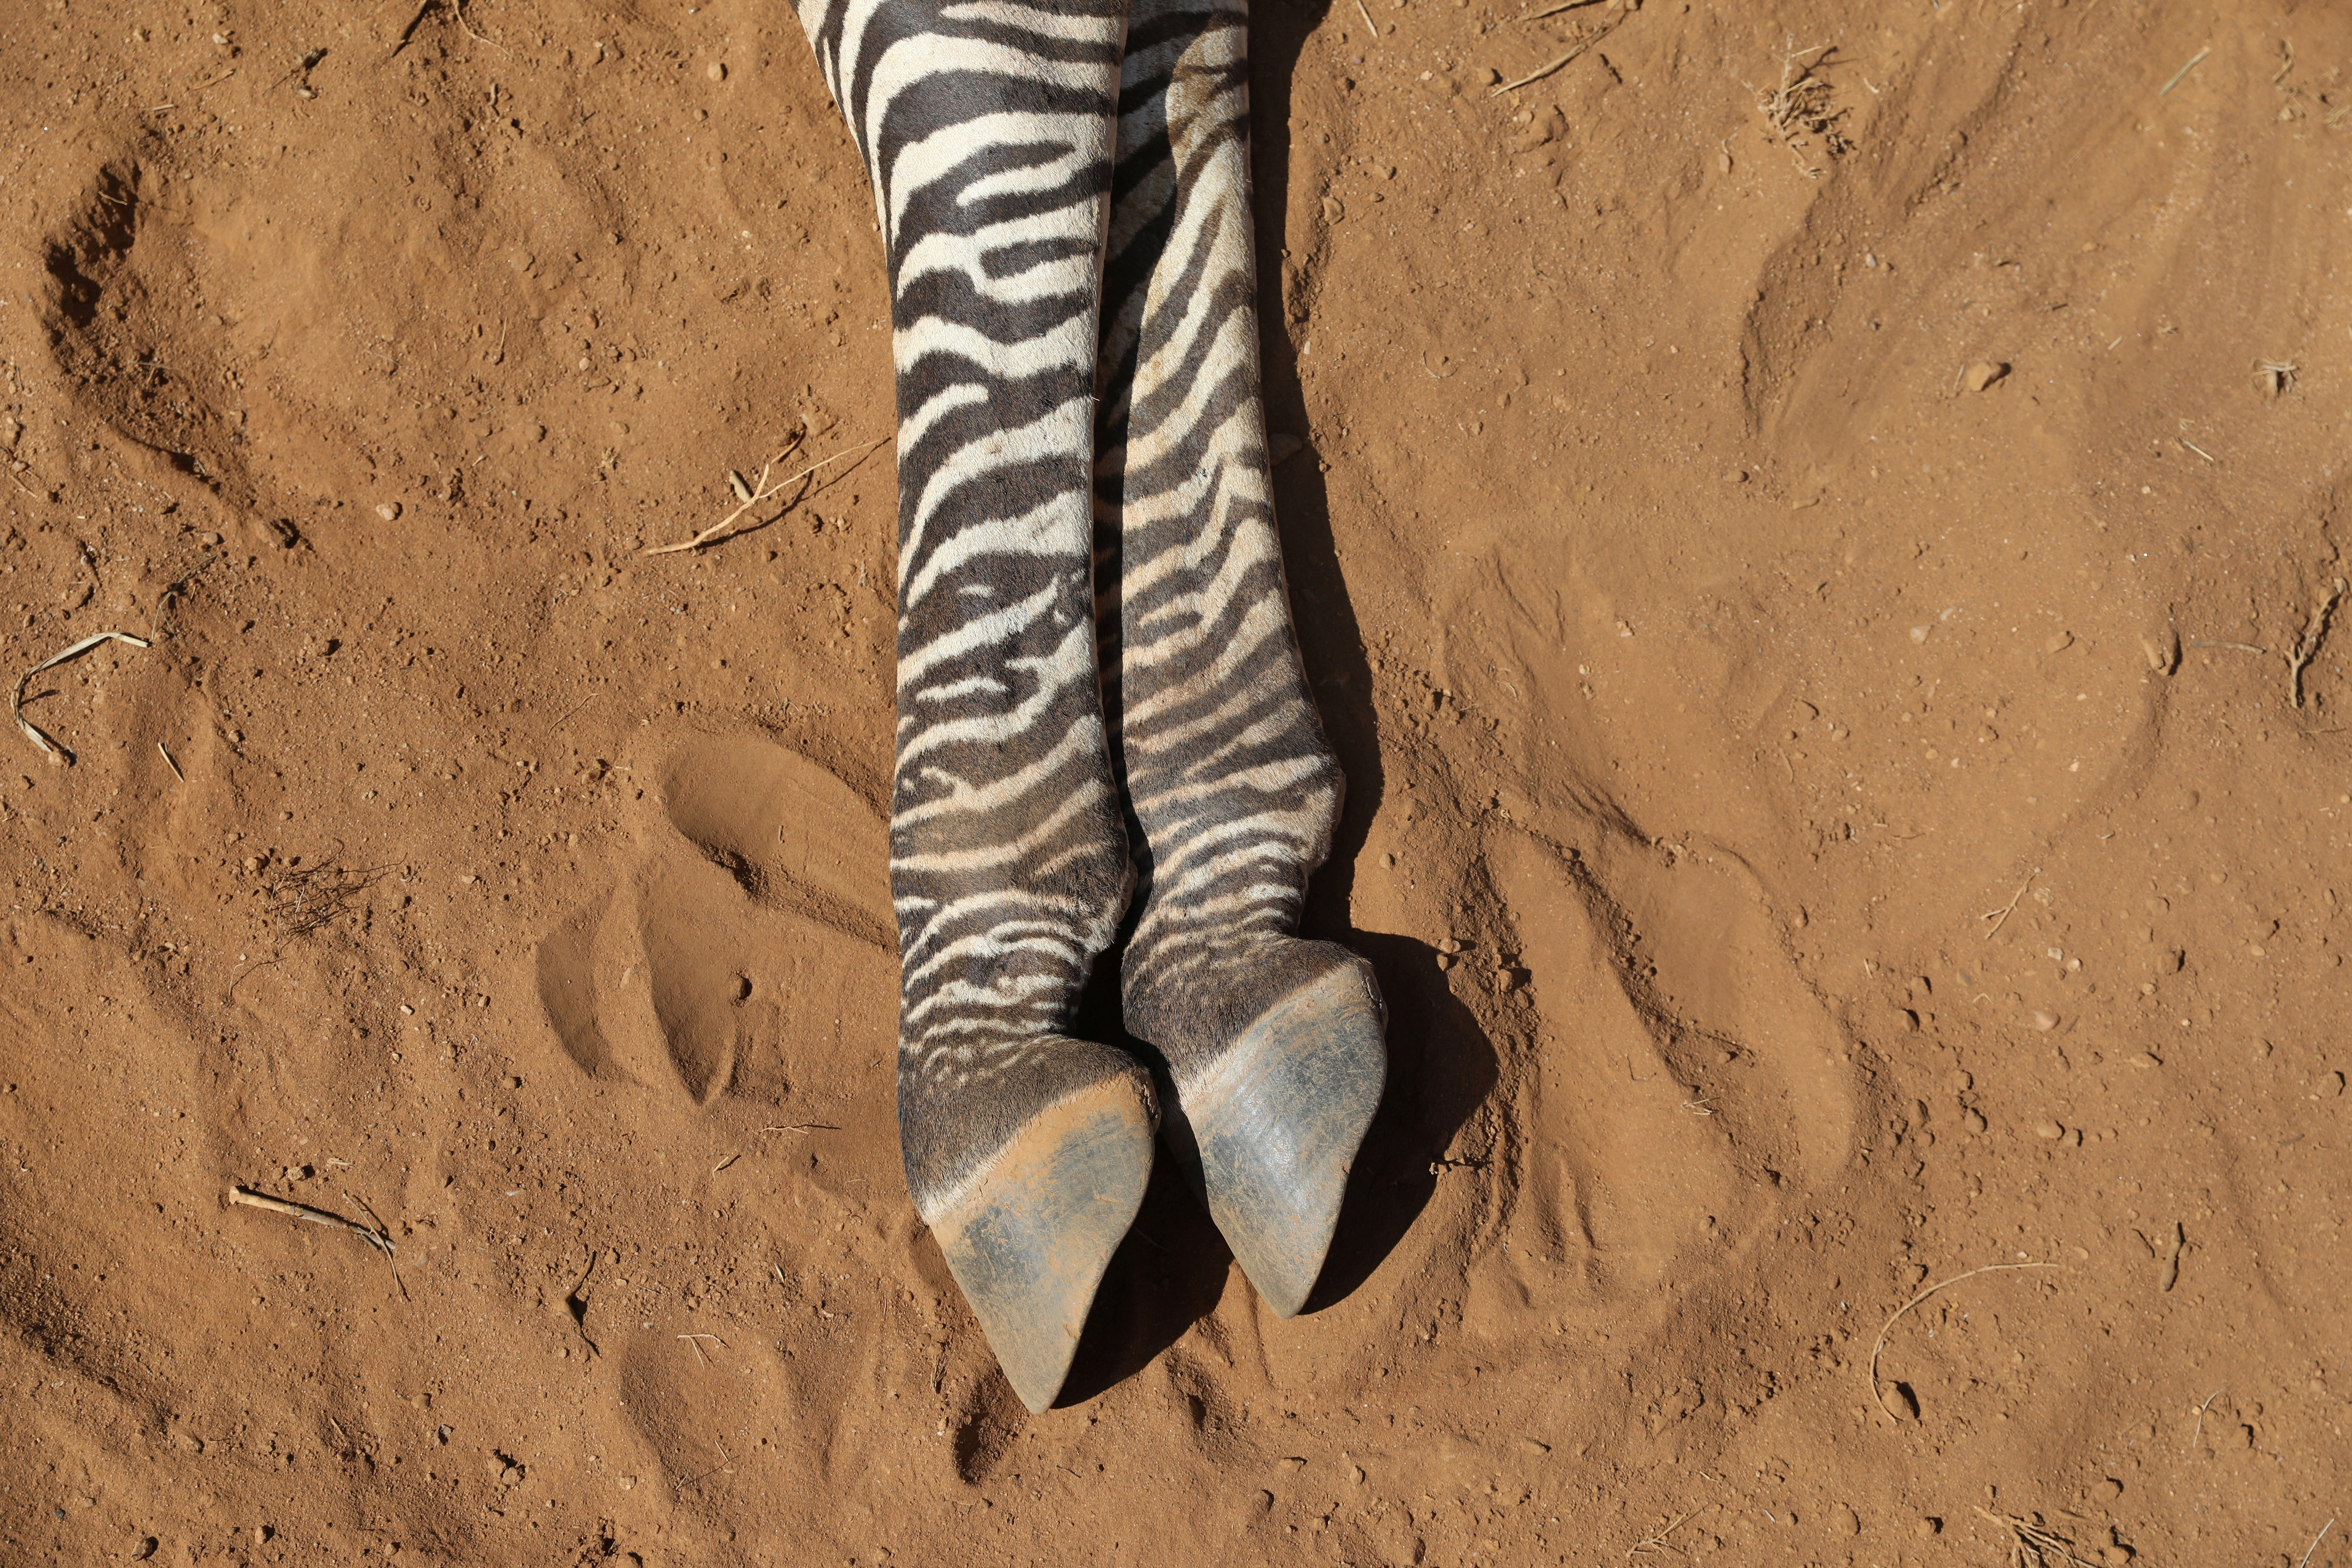 The carcass of an endangered Grevy's Zebra, which died during the drought, is seen in the Samburu national park